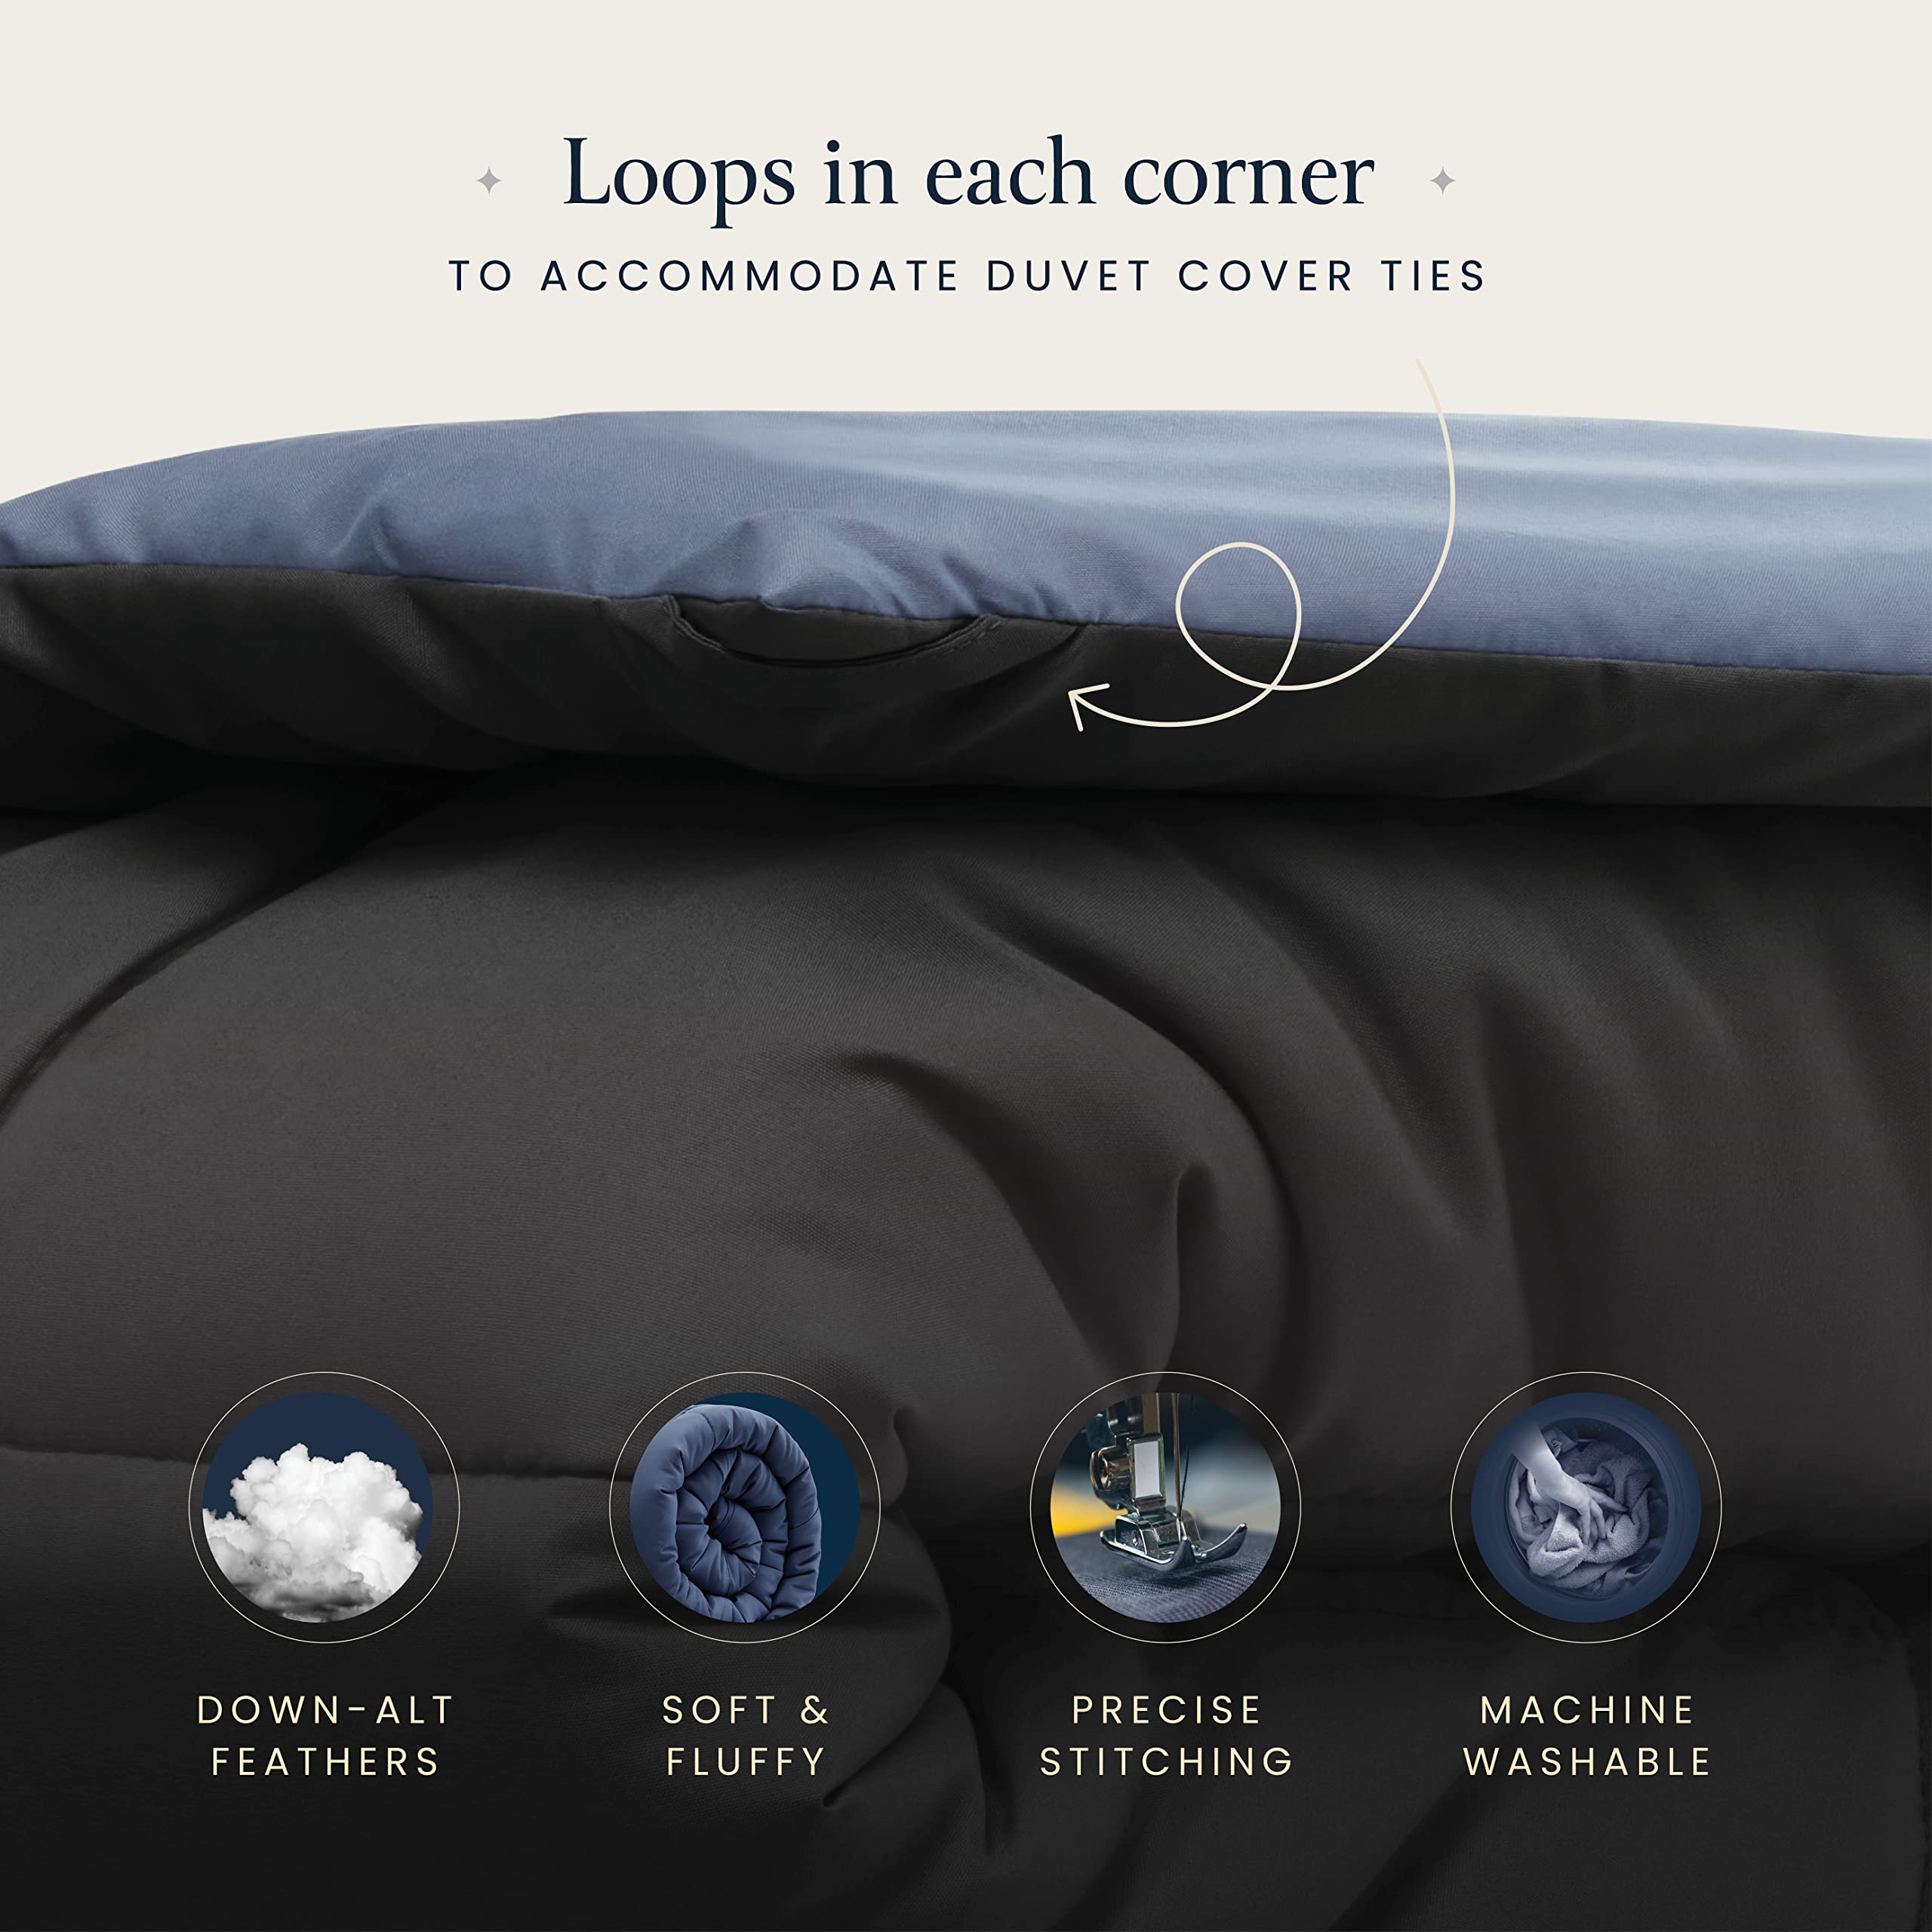 Down-Alternative Comforter Duvet Insert - All-Season Mid-Plush Cooling Comforter - Perfect for Hot Sleepers - Soft & Fluffy Bed Comforter, Elegant Box Quilted Comforters  - Very Good